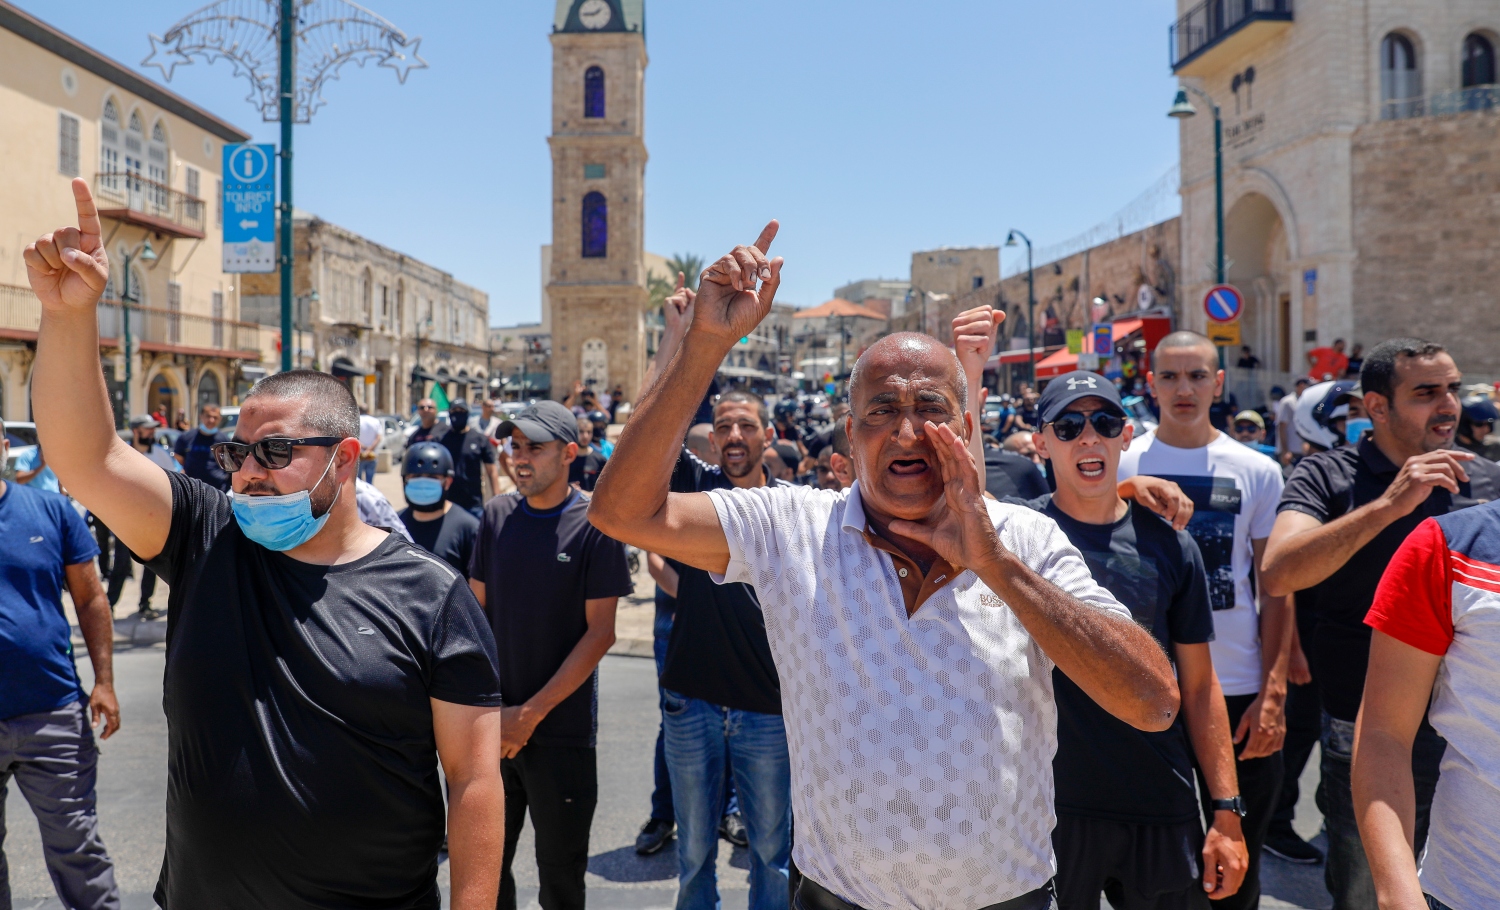 Palestinian citizens of Israel demonstrate on 12 June in the Old City of Jaffa against the decision by the Tel Aviv municipality to demolish the al-Isaaf cemetery (AFP)